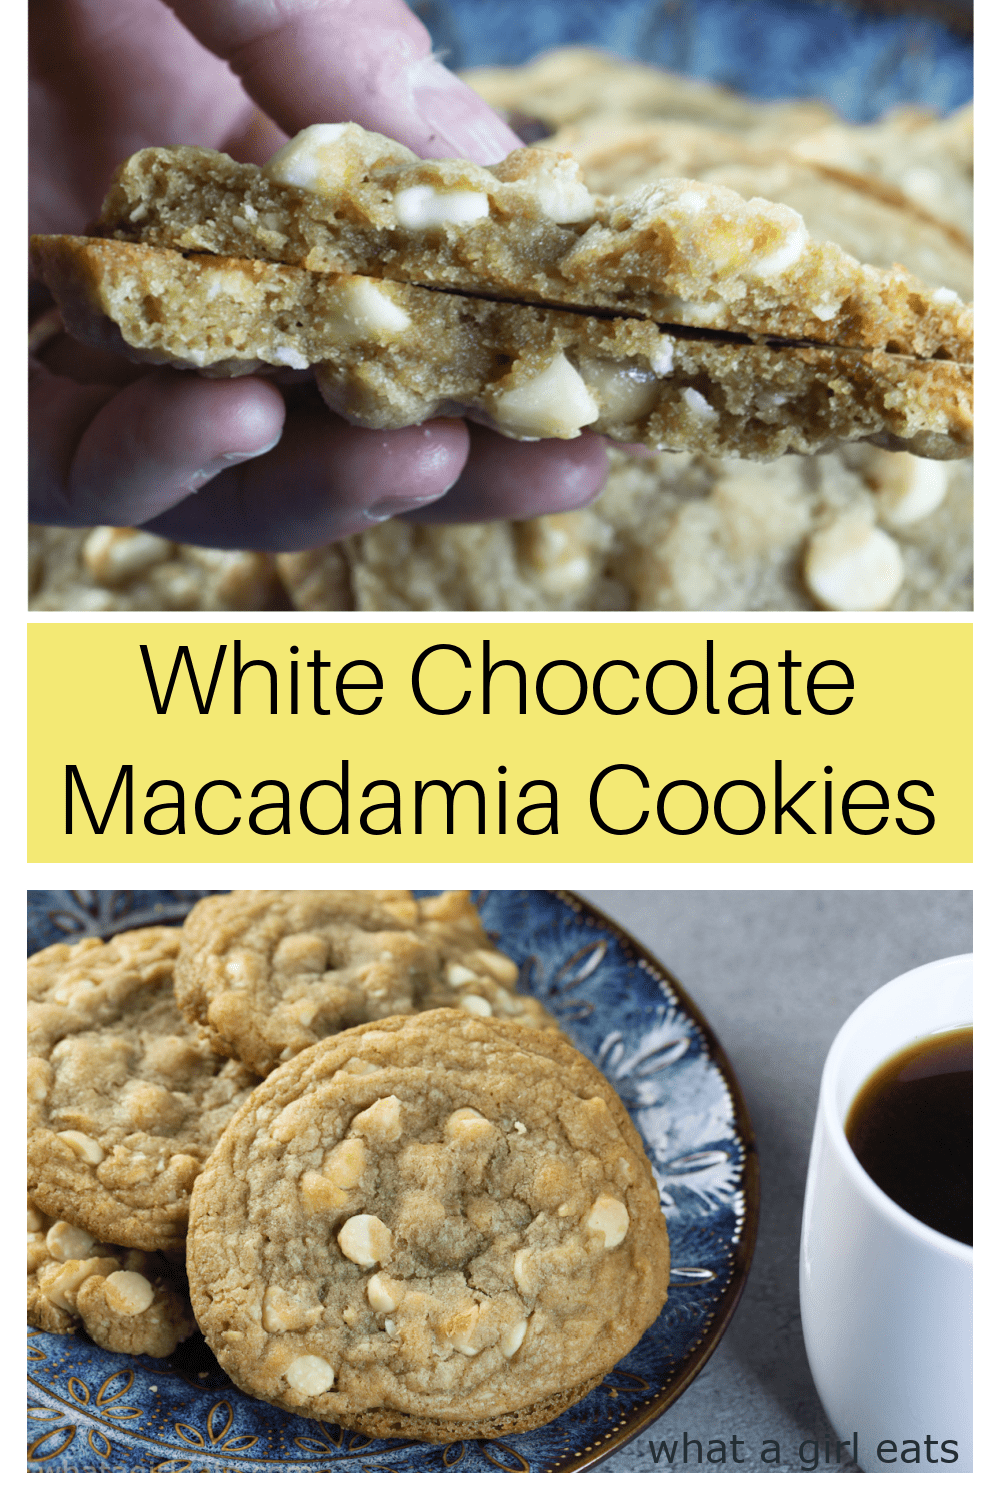 White chocolate macadamia cookies rival the ones you find in a bakery. Extra large cookies with chewy centers and a hint of caramel.